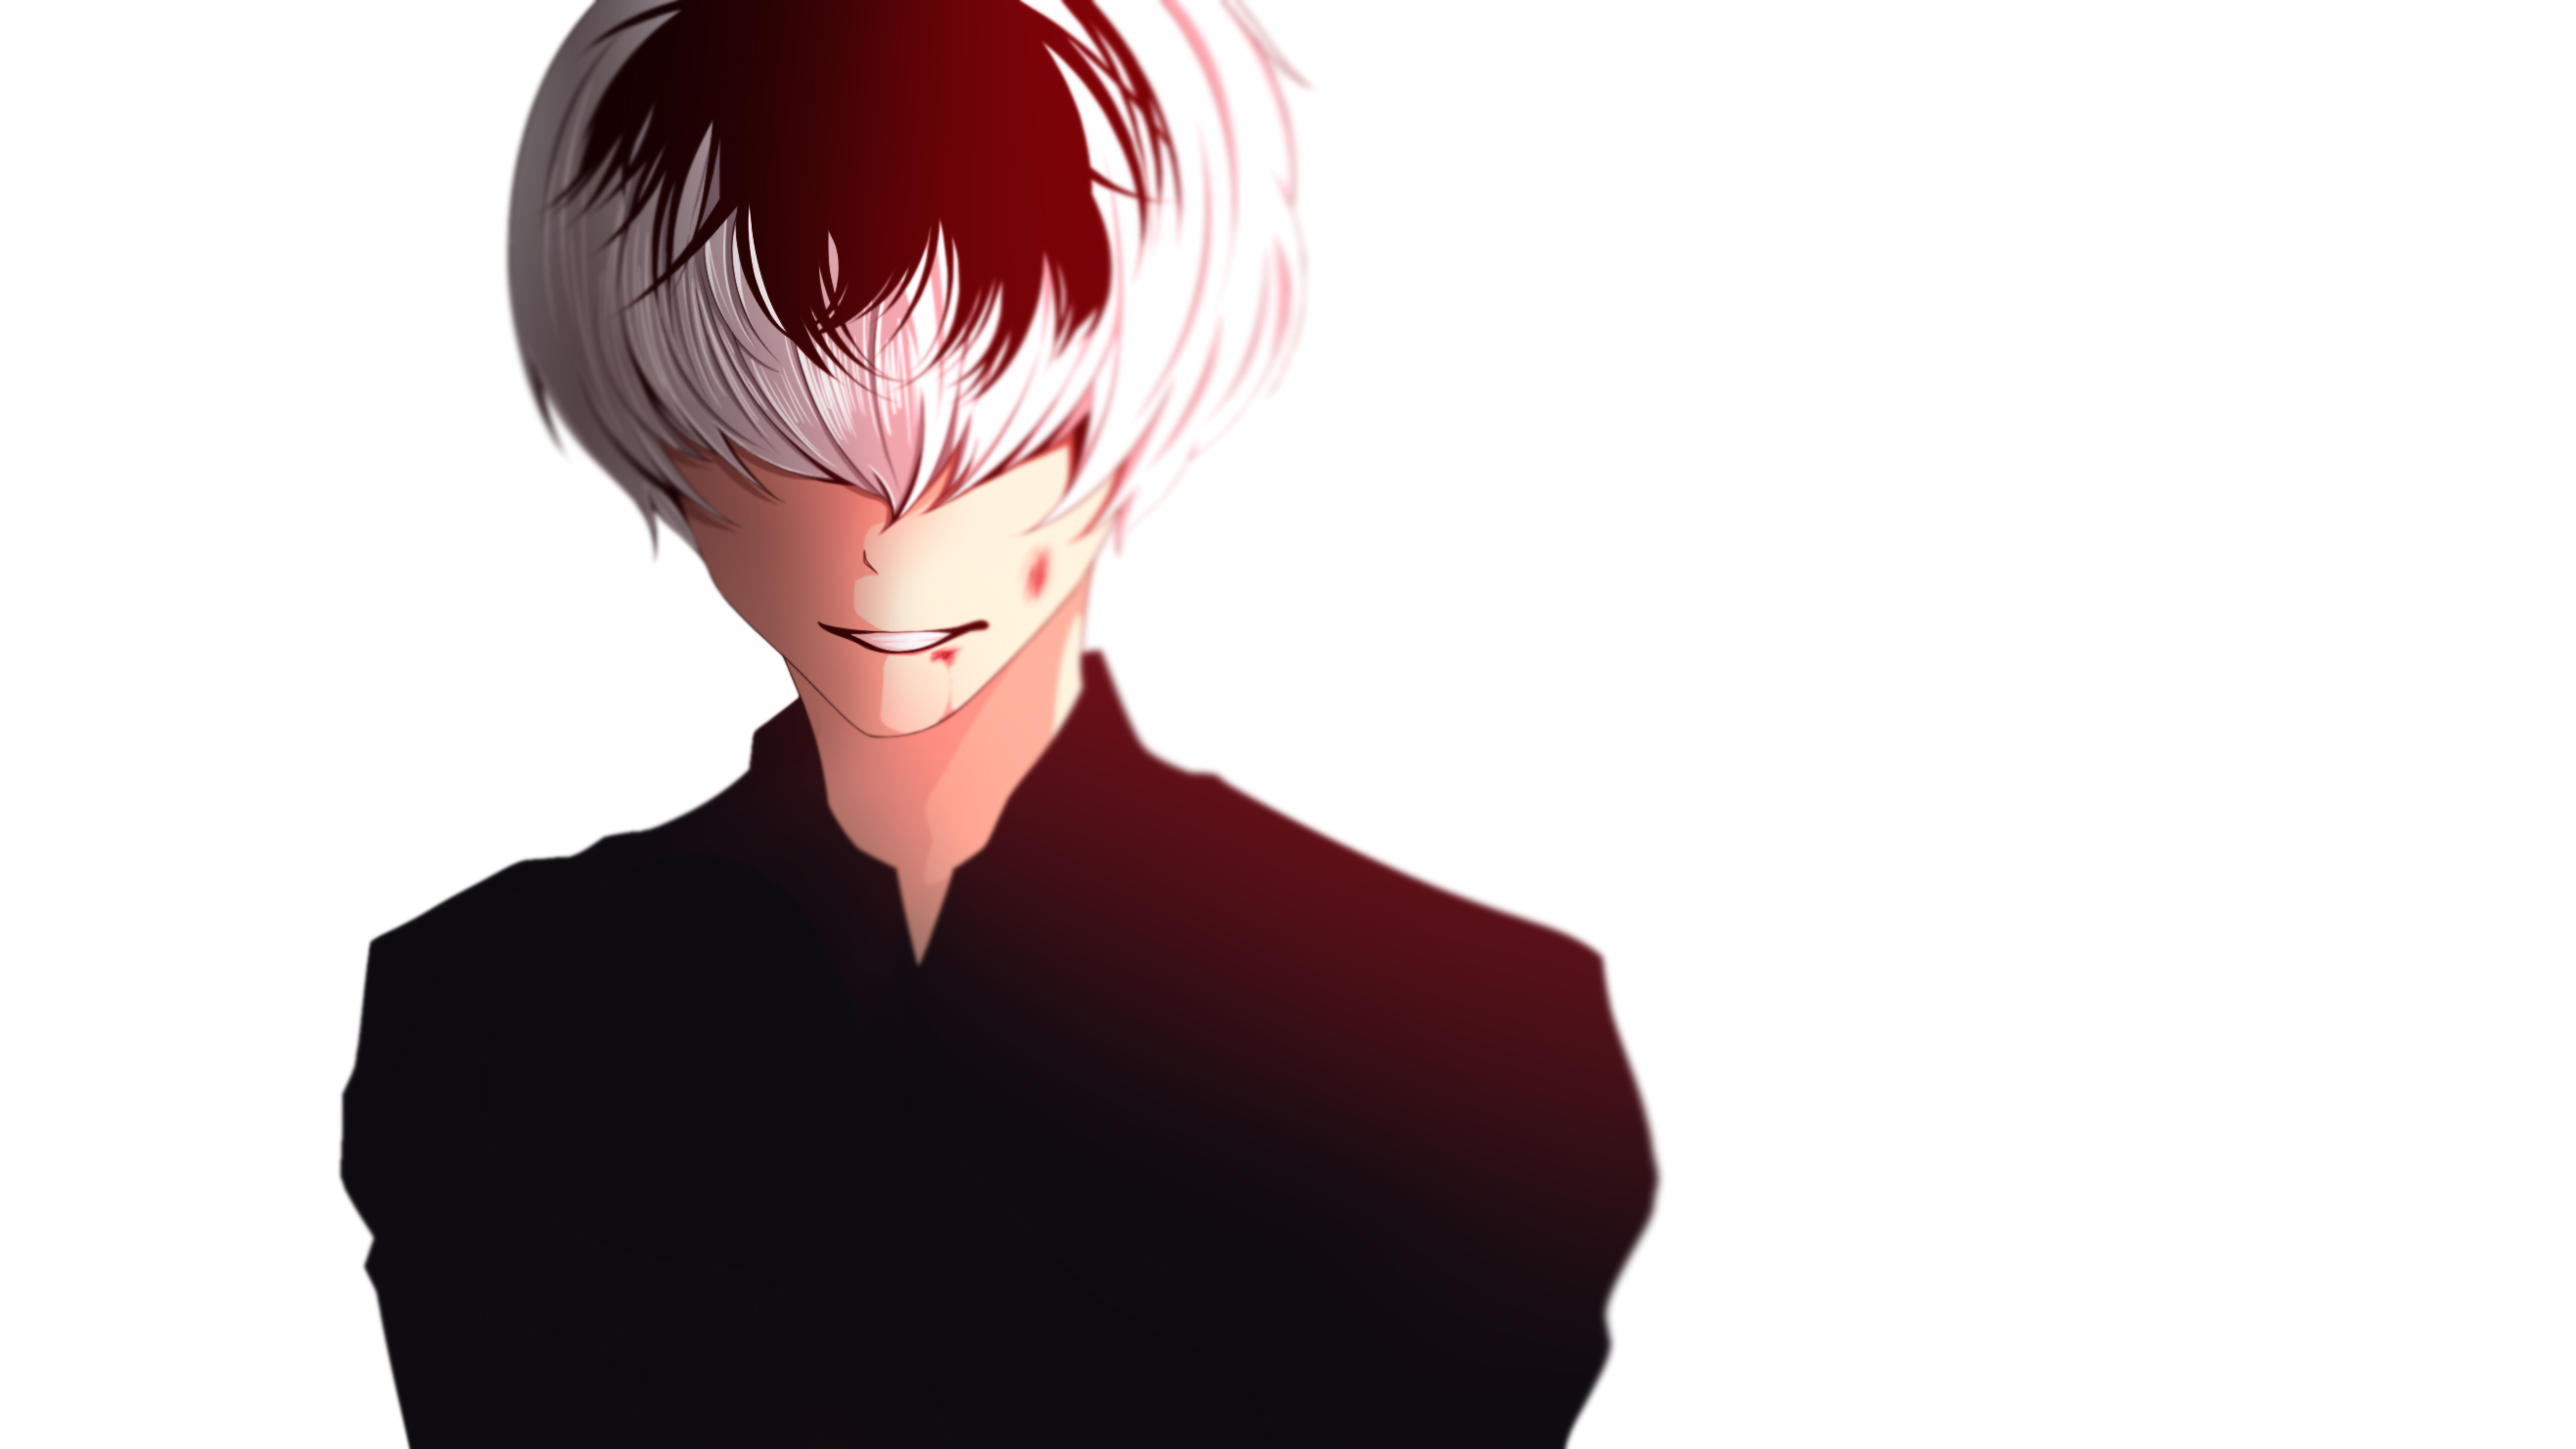 Boy Haise Sasaki Smile Tokyo Ghoul Tokyo Ghoul A Tokyo Ghoul Re Two Toned Hair White Hair 2632x1481